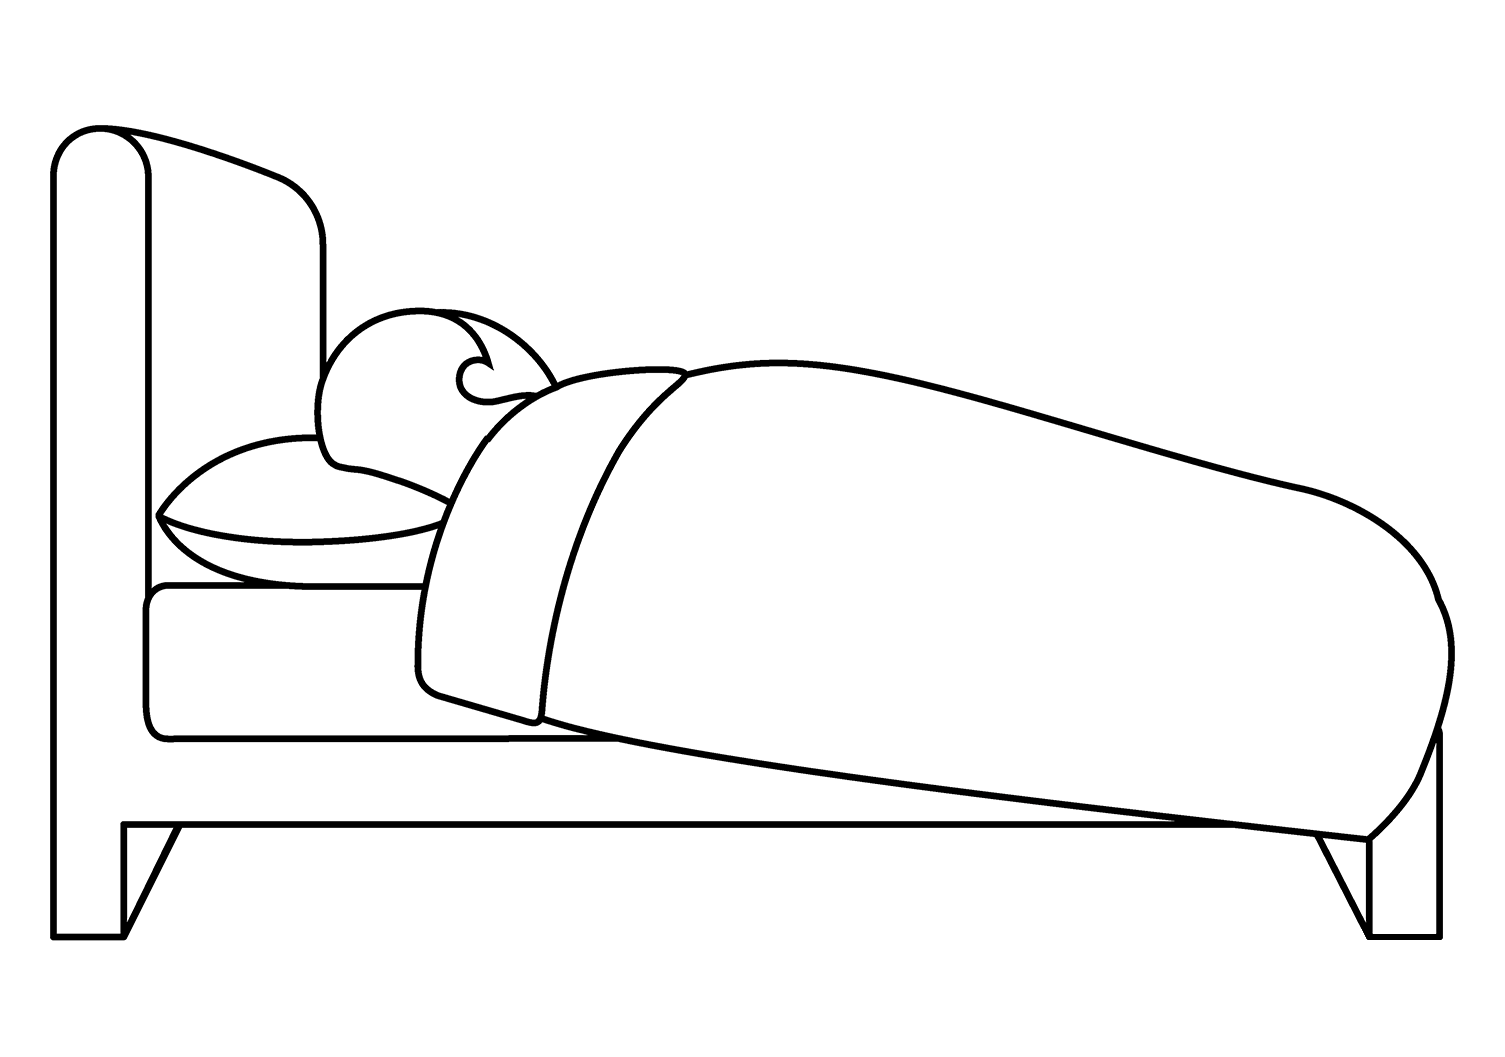 Person in Bed Emoji coloring page - ColouringPages